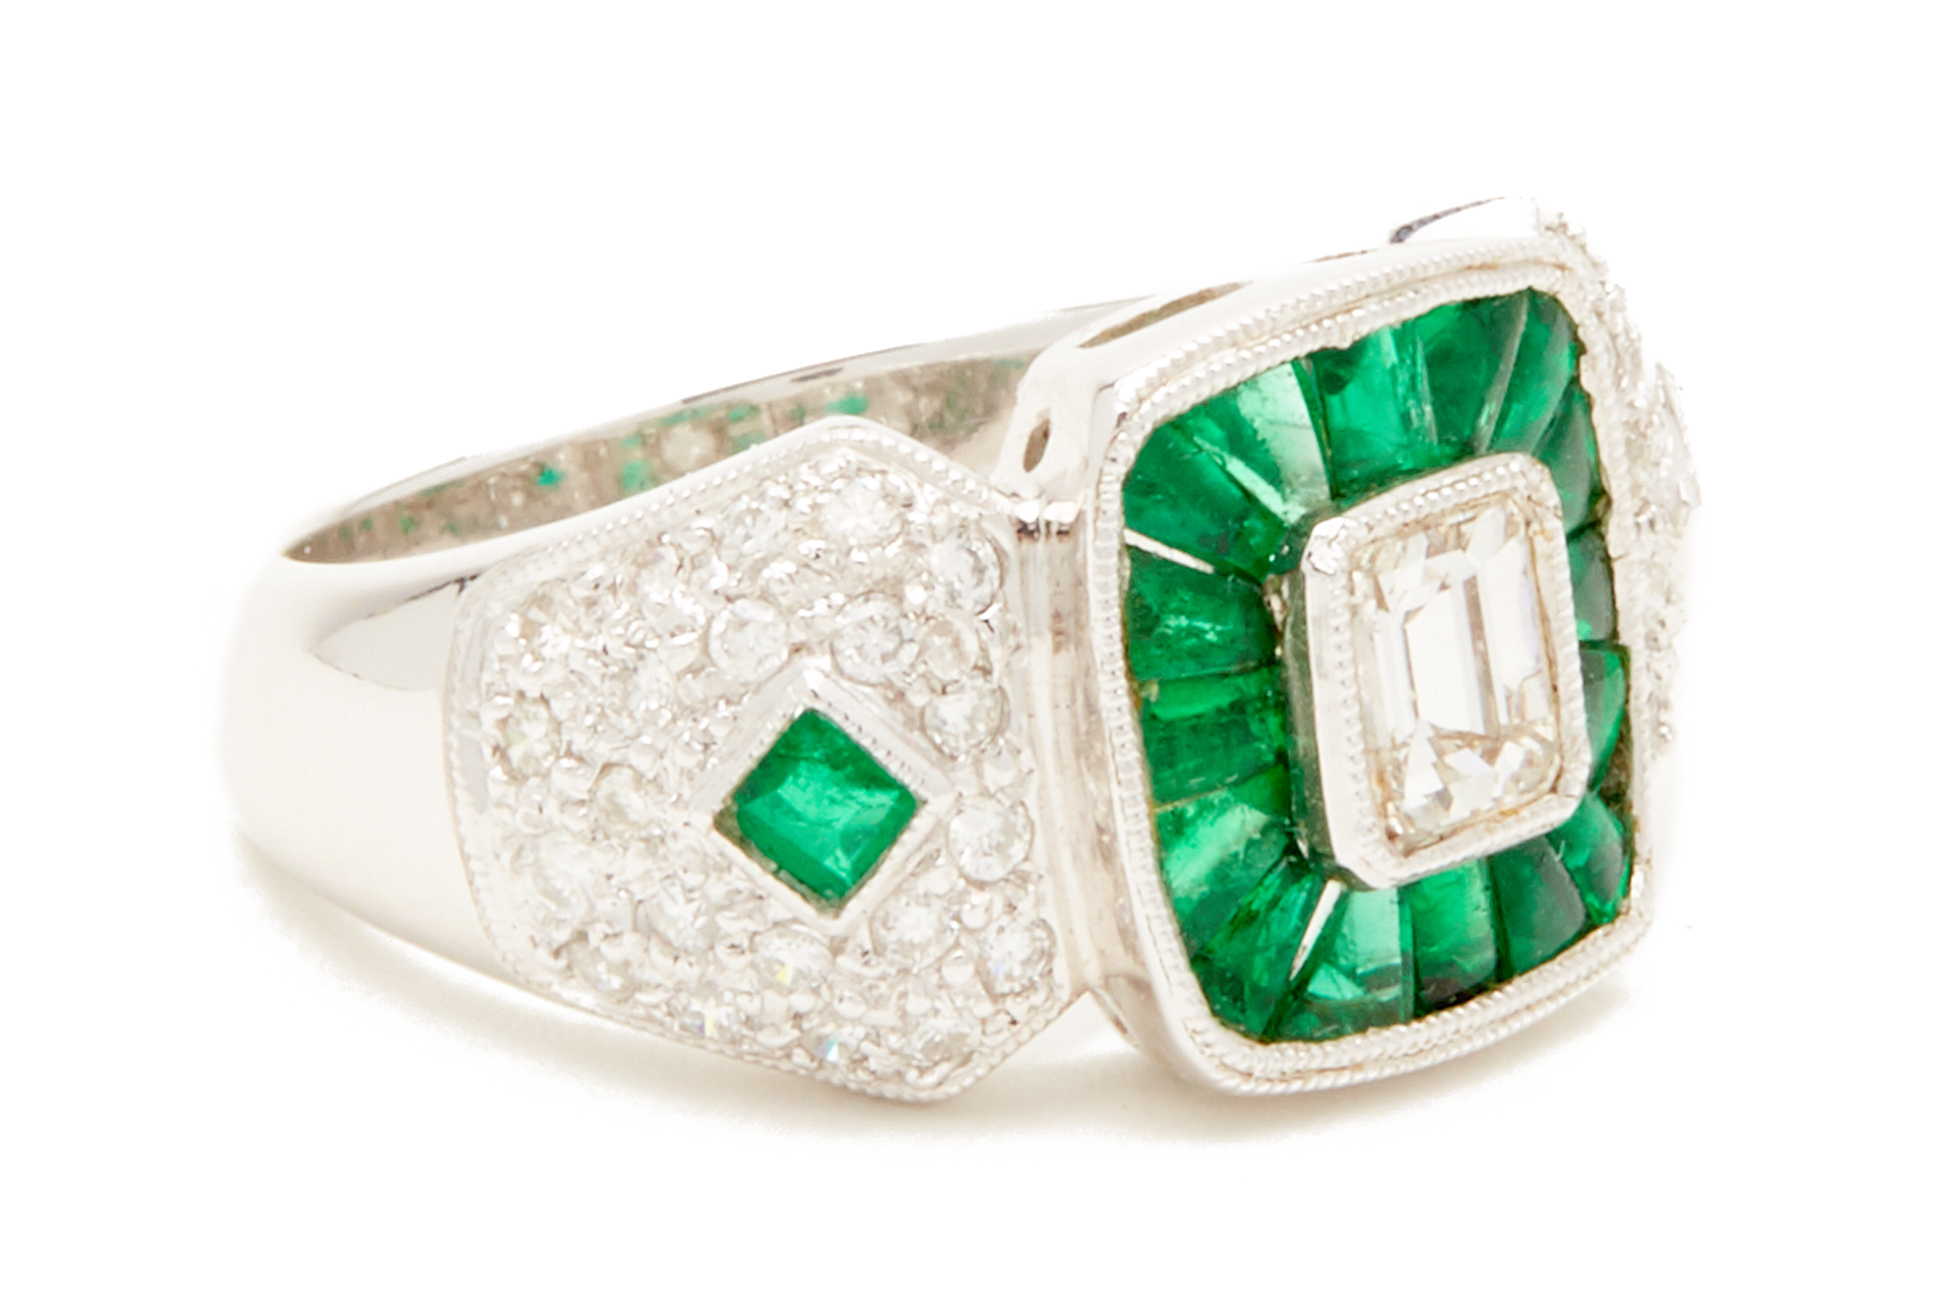 A PLATINUM, EMERALD CUT DIAMOND AND EMERALD RING - Image 2 of 4